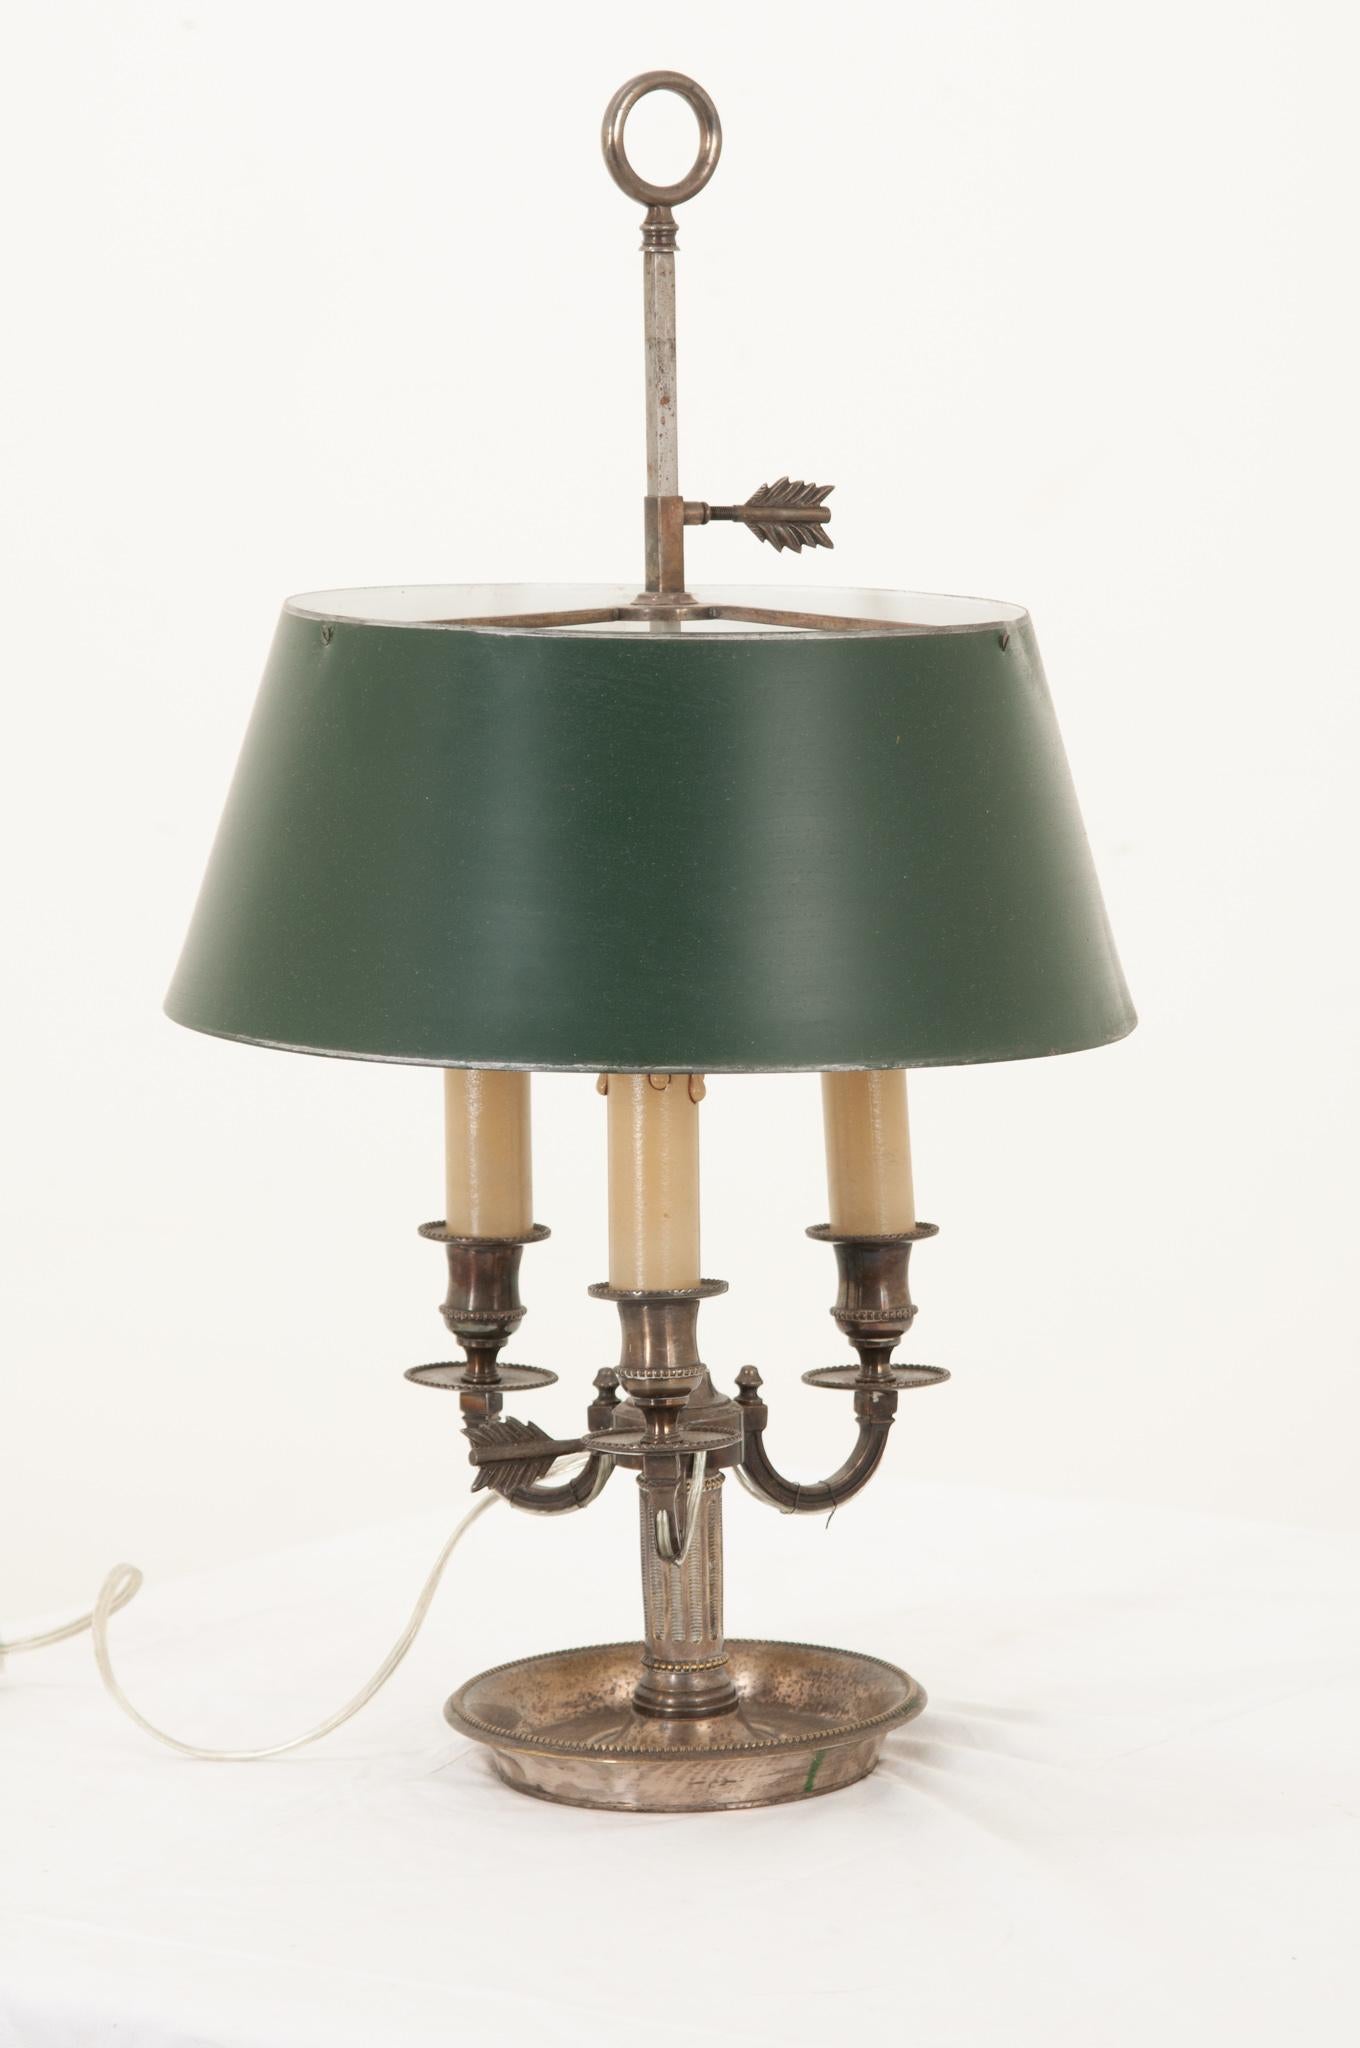 French Bouillotte lamp with its original painted green tole shade. Bouillotte is a card game that became popular in France during the 18th & 19th centuries. For light, they would use a bouillotte lamp. This particular one is brass with 3 candelabra